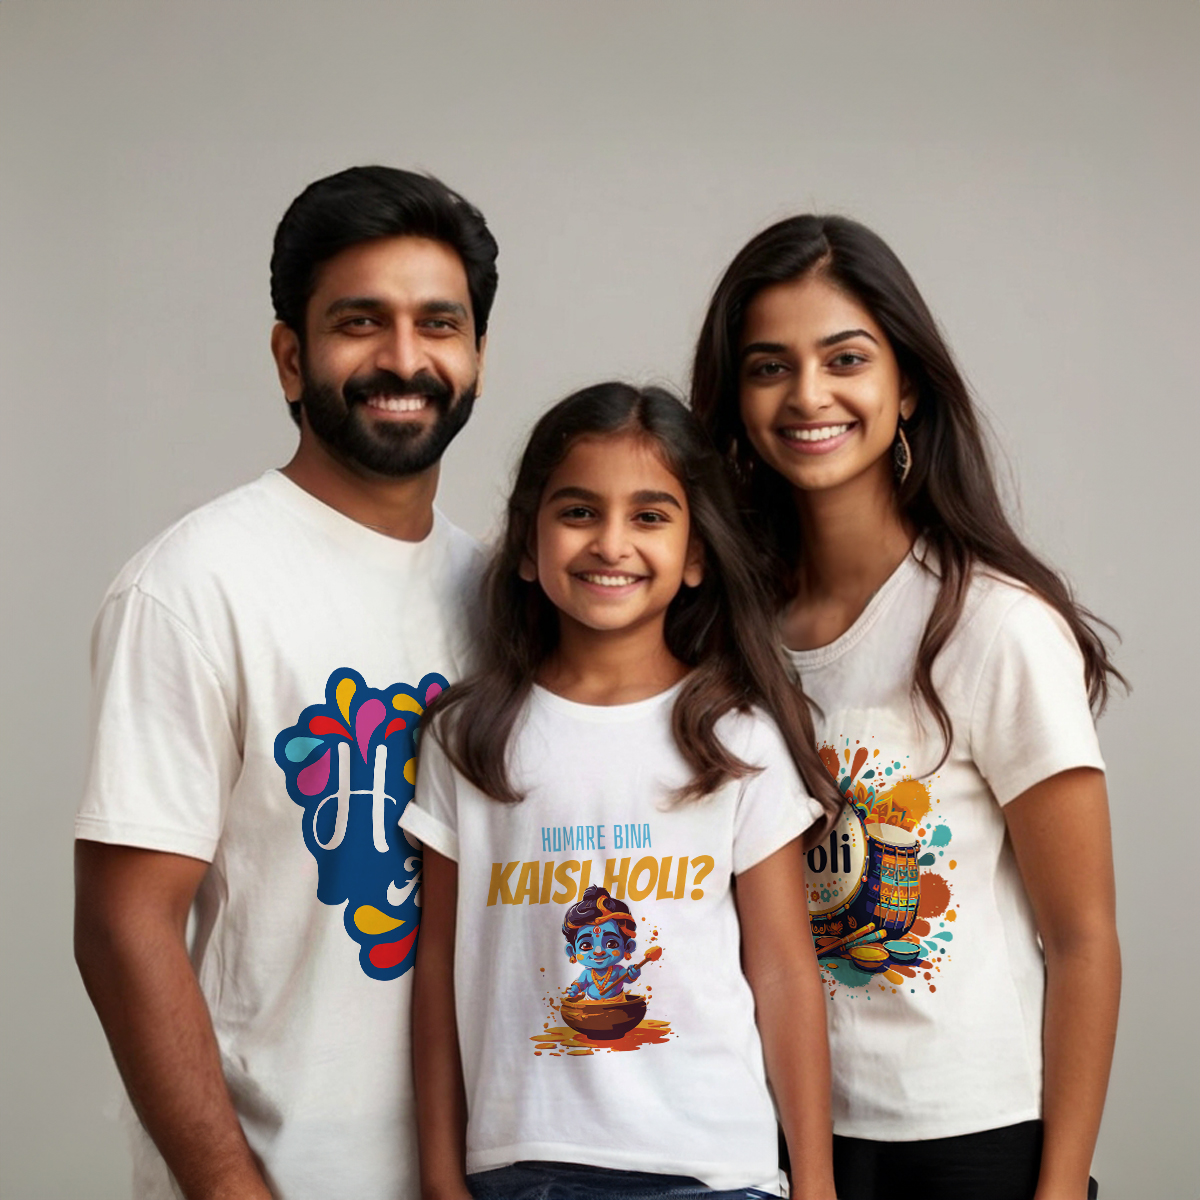 Wear Your Festive Spirit: Happy Holi T-shirt Designs for the Entire Family